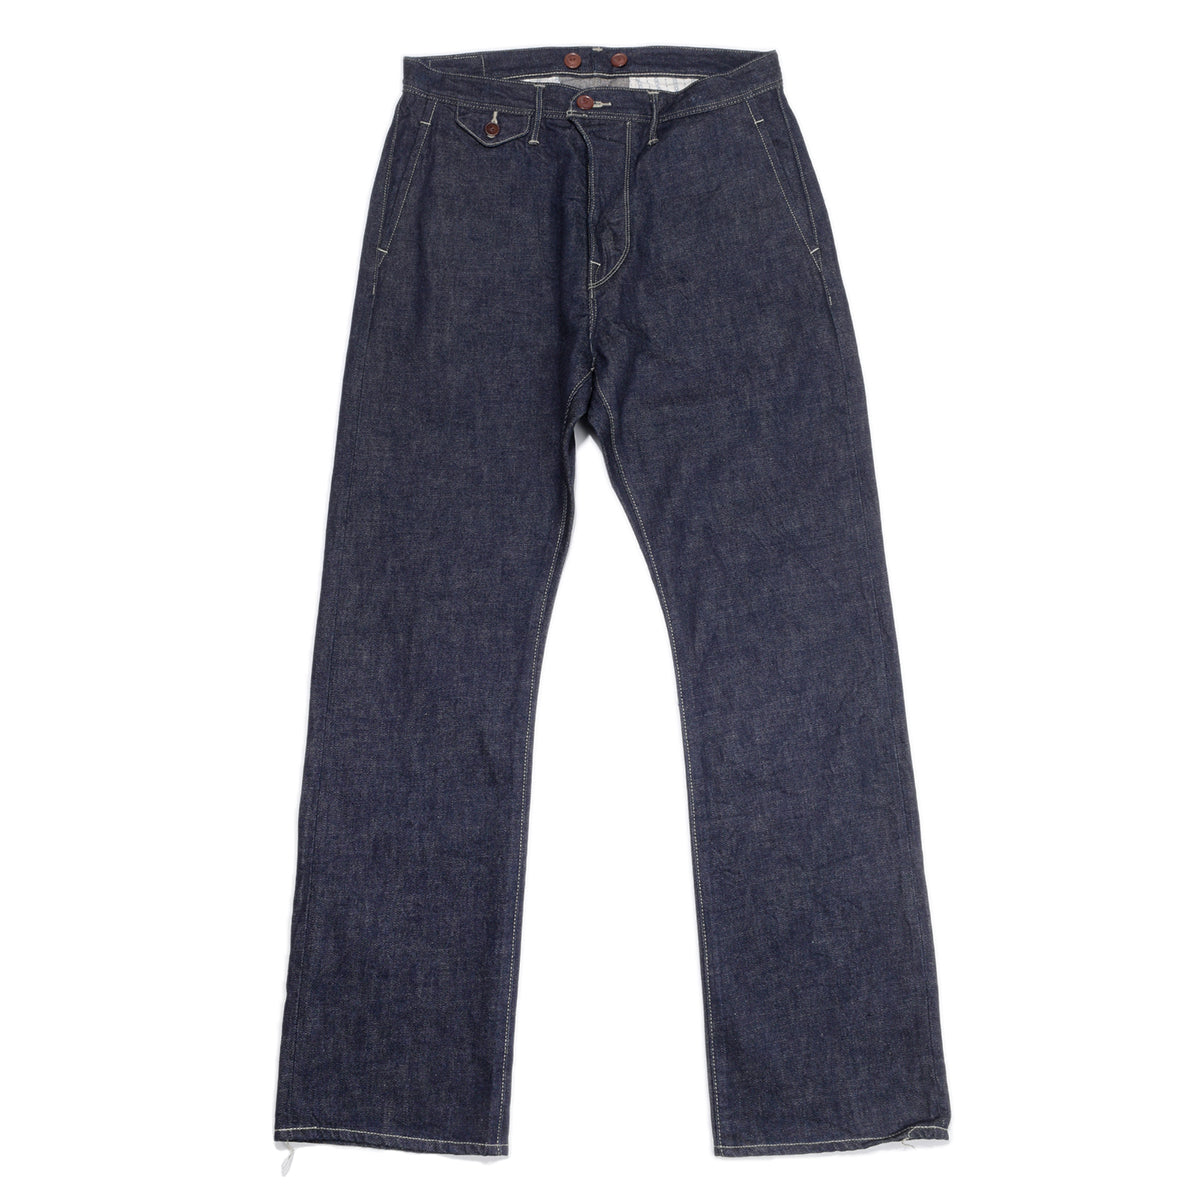 OR-1050A Denim Trousers | BLUE IN GREEN SOHO | Reviews on Judge.me